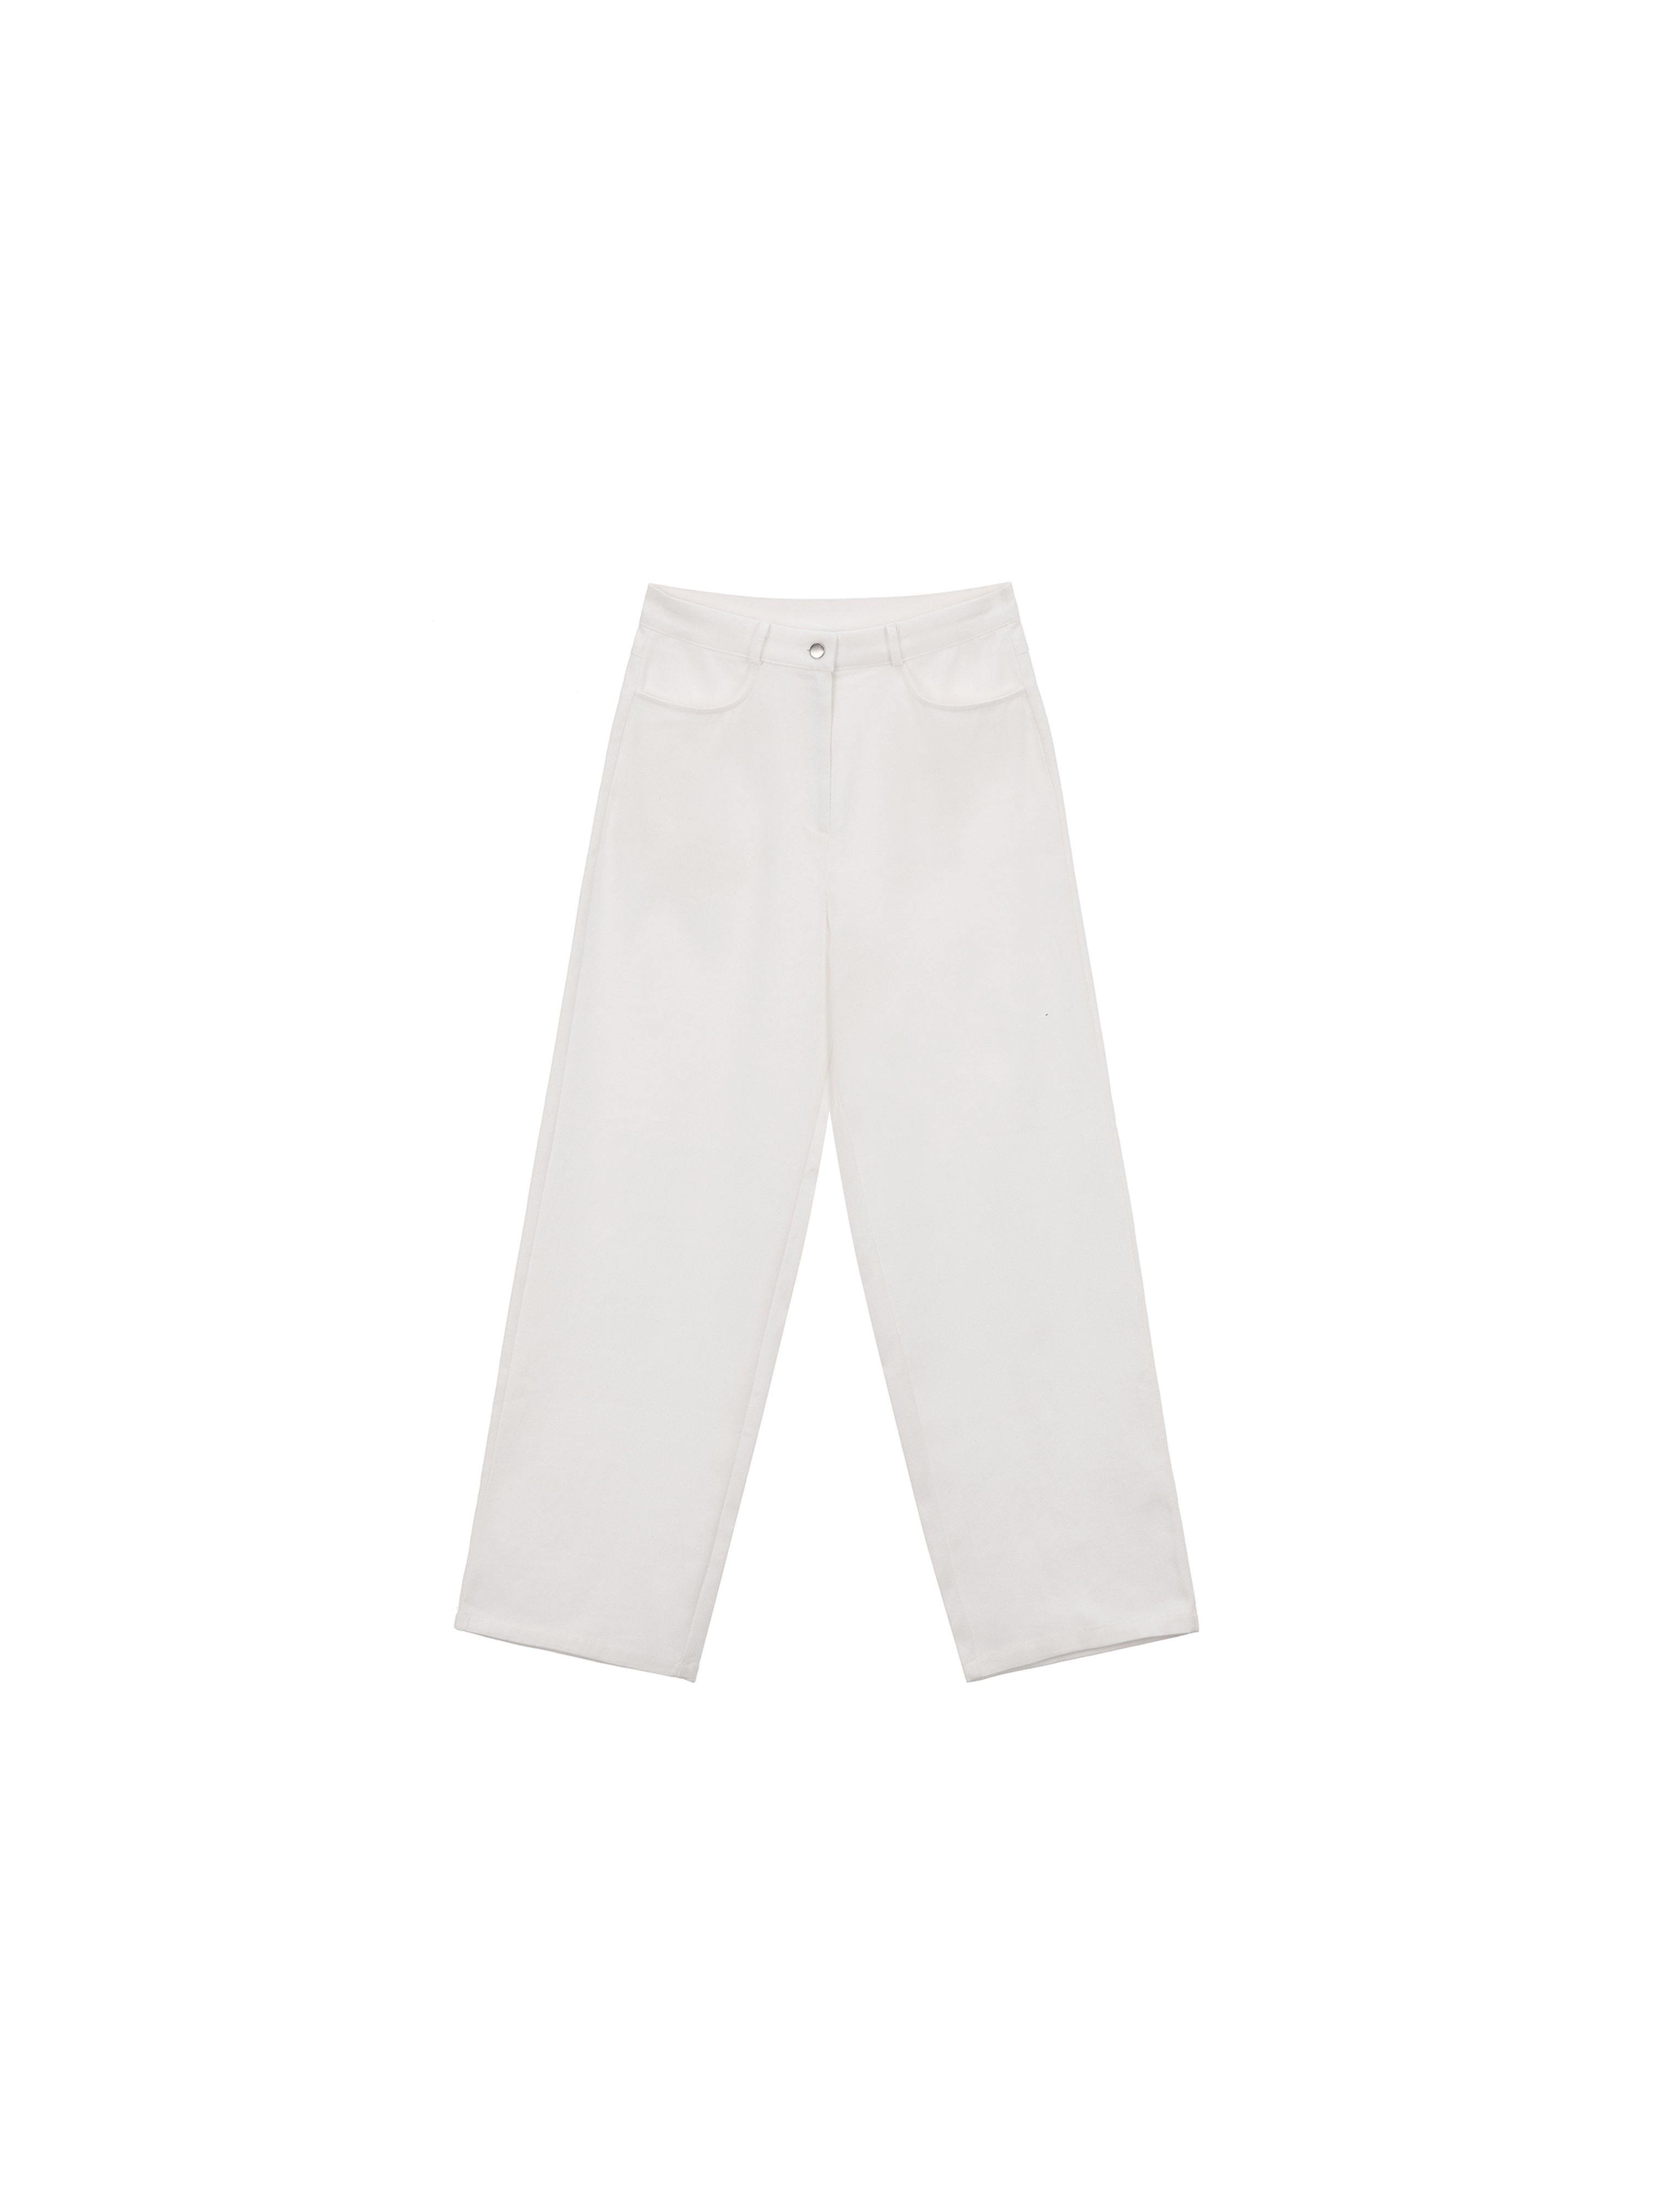 essential white wide pants